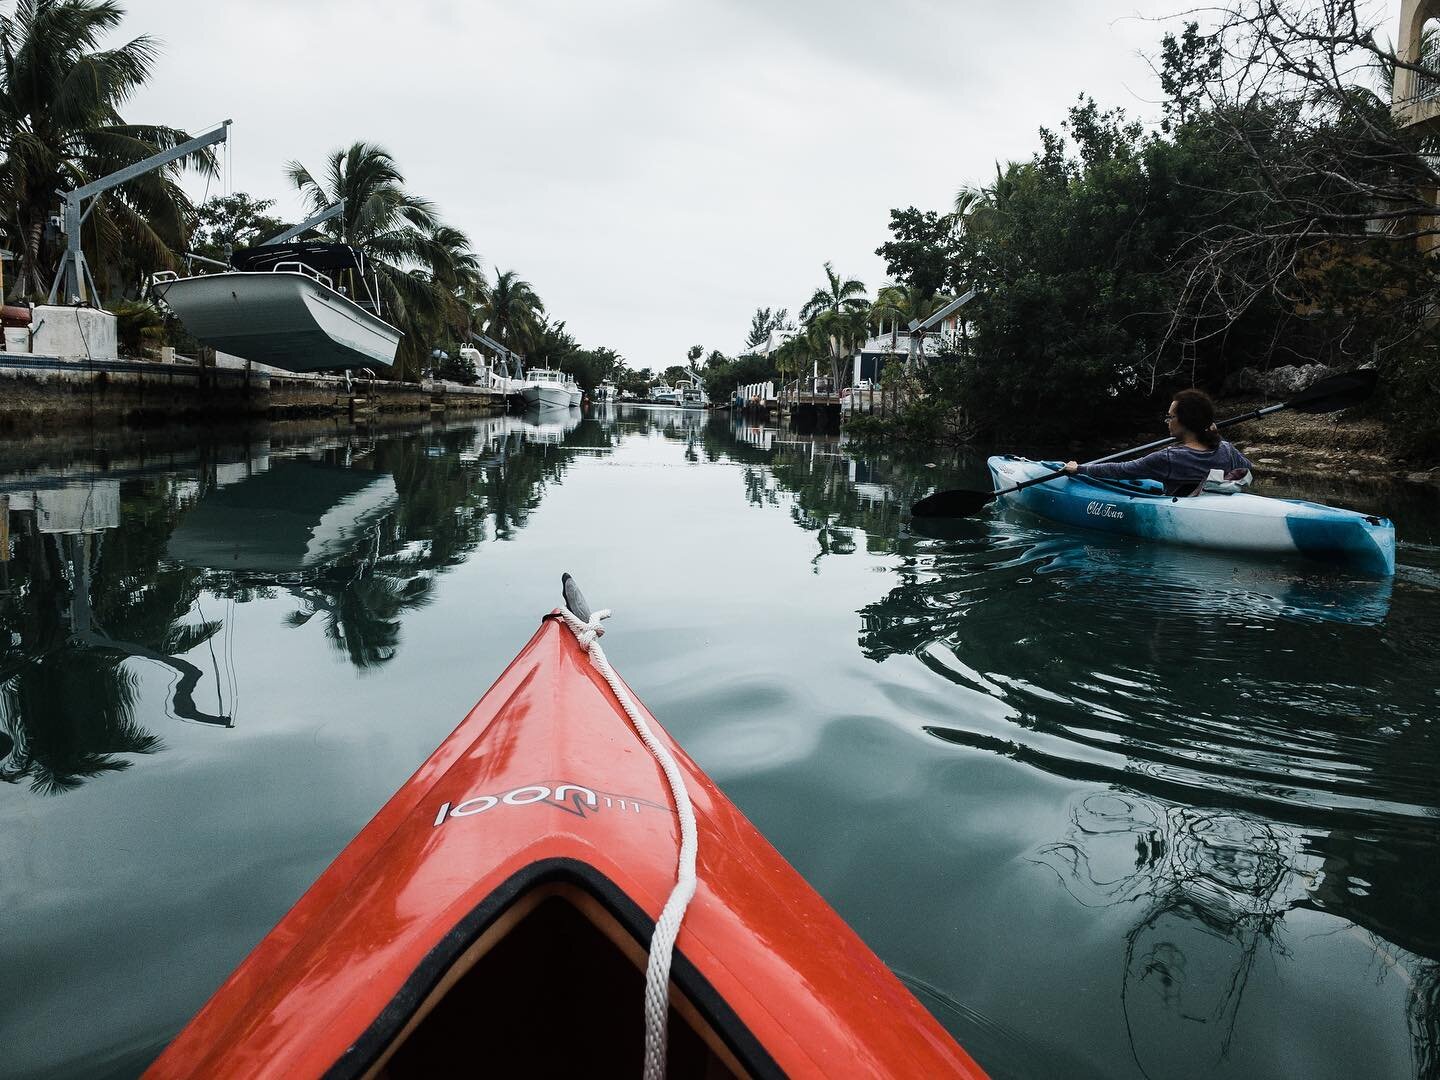 There&rsquo;s nothing more relaxing than kayaking out into the mangroves in the morning.
.
.
.
#shotoniphone #summerlandkey #summerlandkeyflorida #floridakeys #oceankayak #iphonexr #lightroommobile #momentapp #mastinlabs